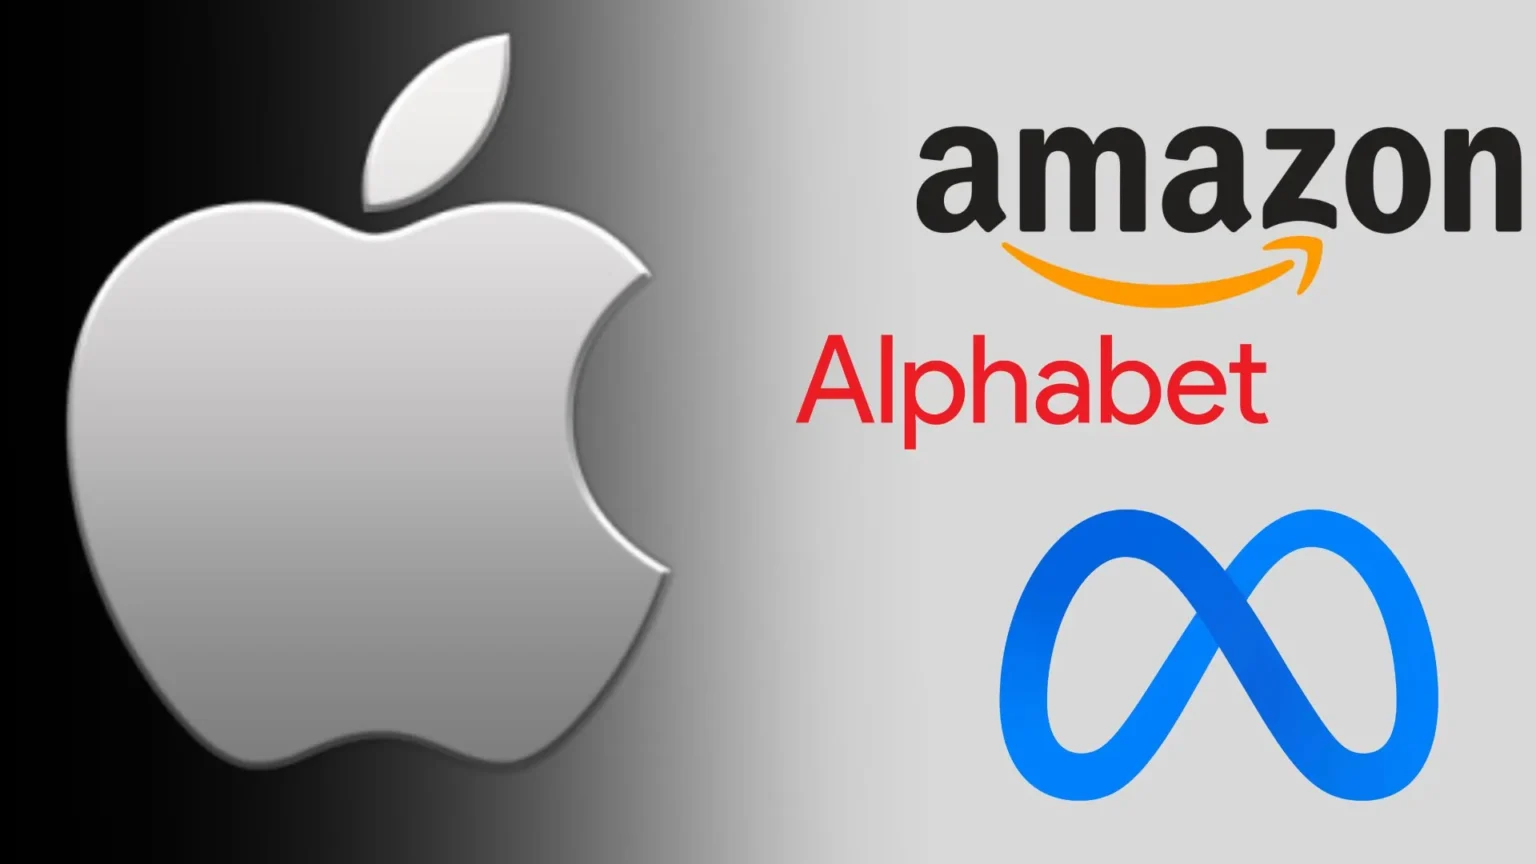 Apple Current Worth is More Than Alphabet, Amazon and Meta Combined